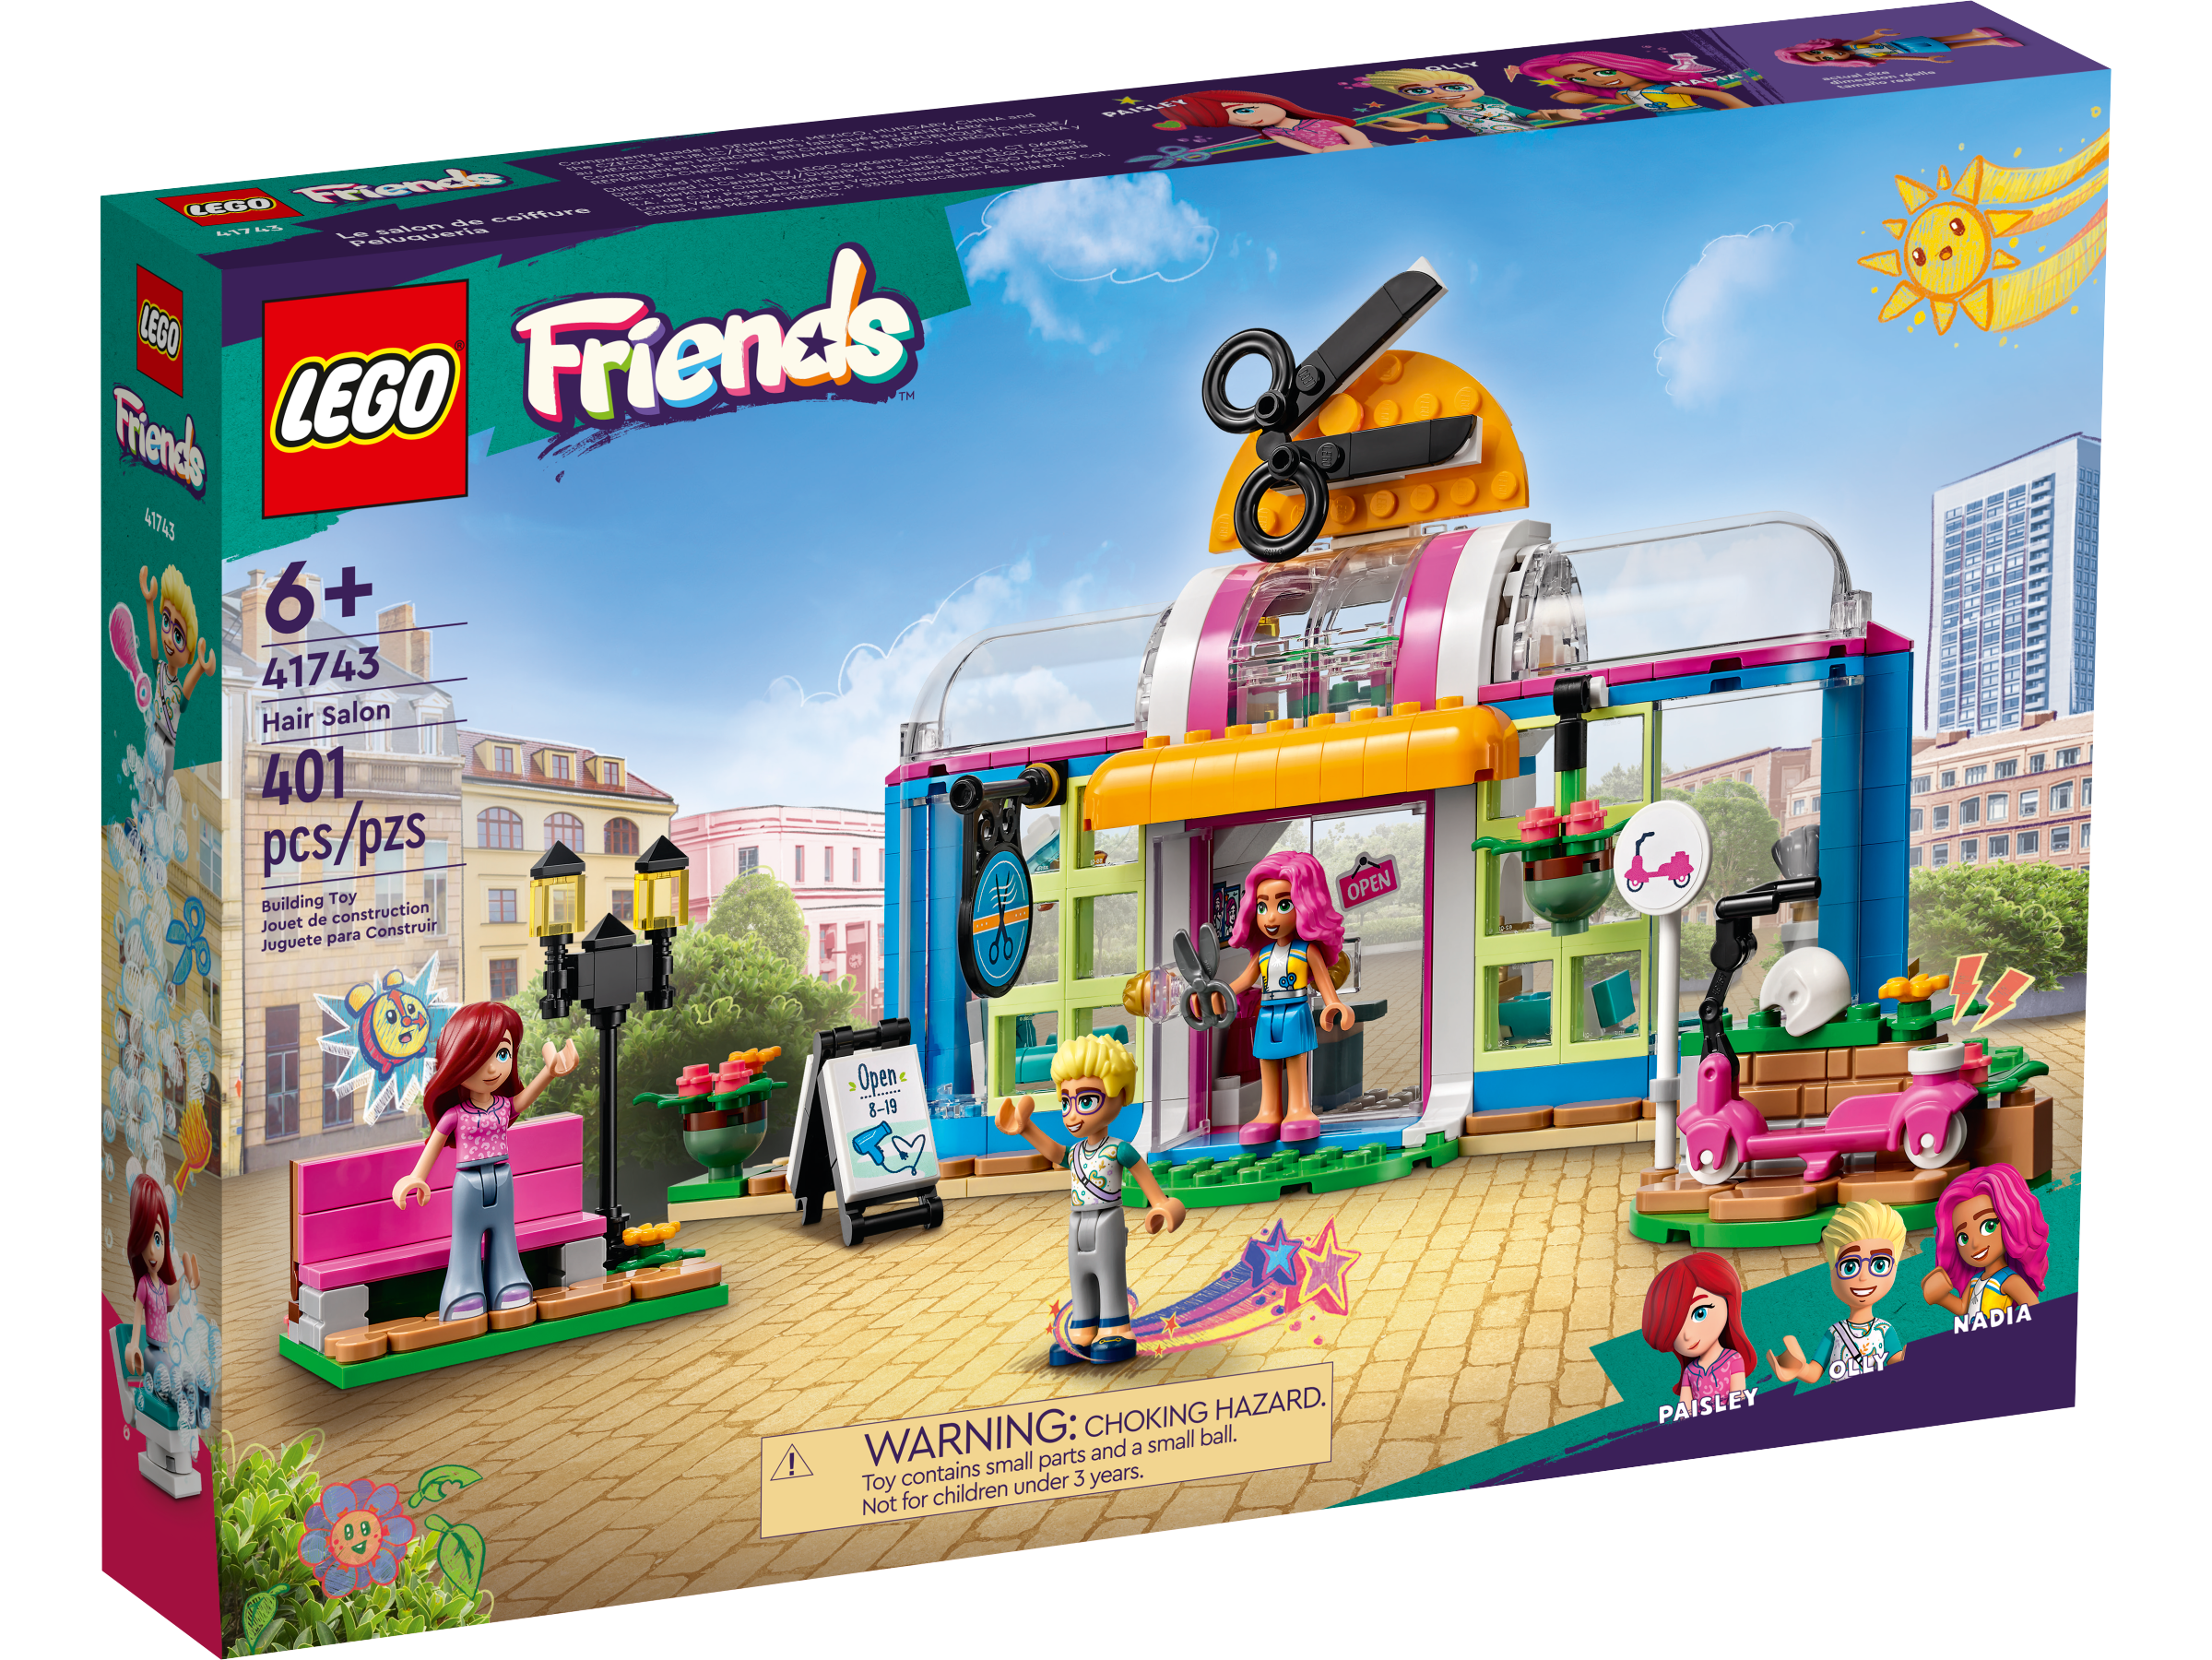 Hair Salon 41743 | Official Buy | online Shop at Friends the US LEGO®